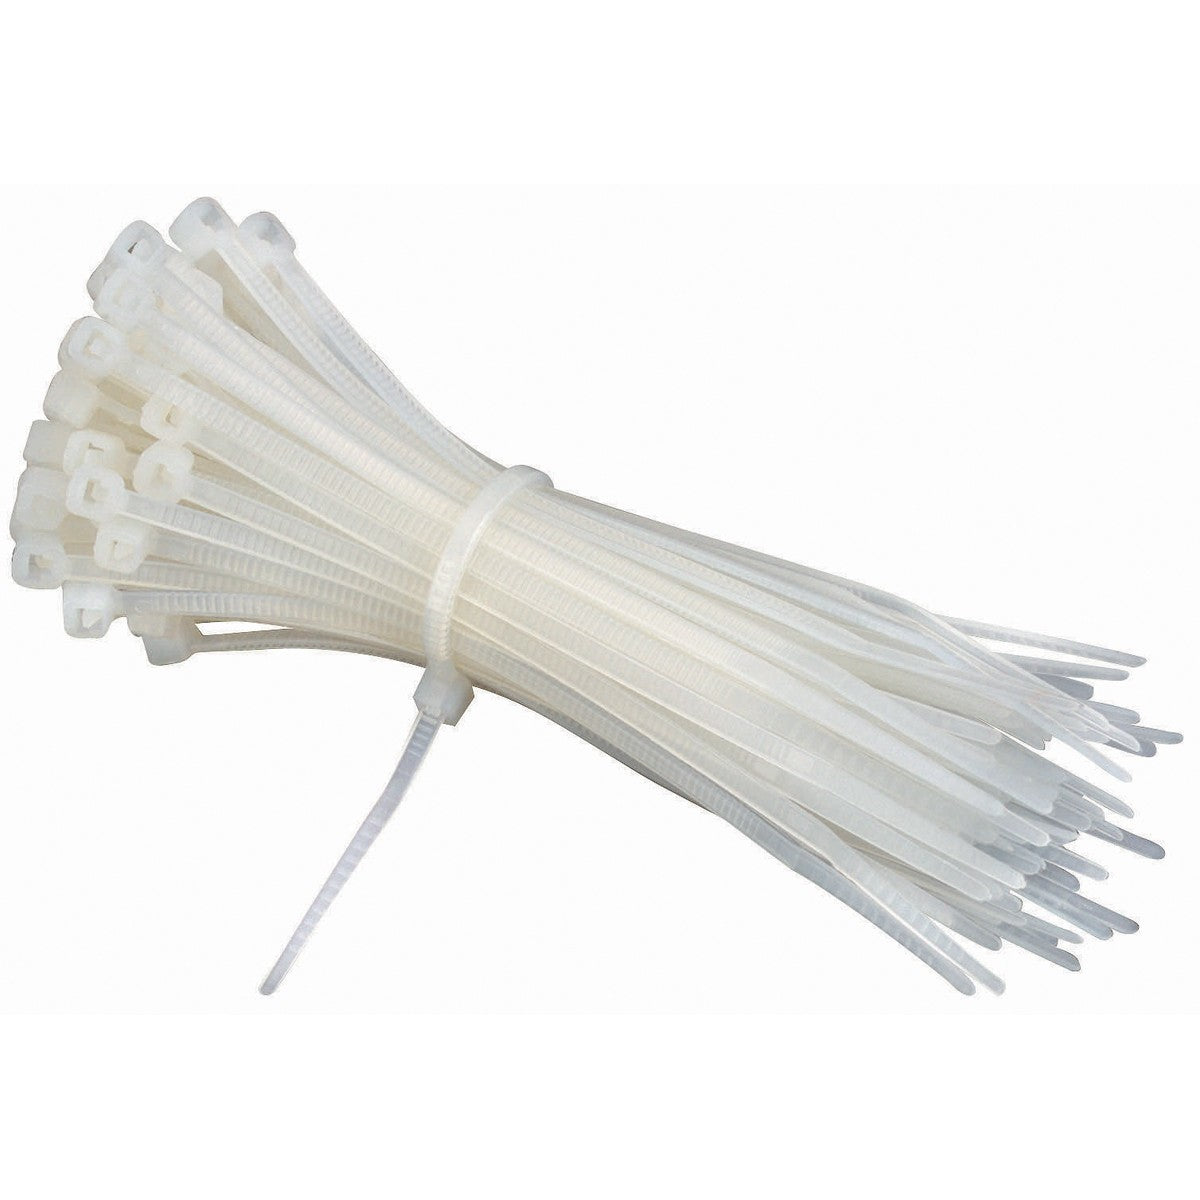 4.6 x 350mm - The Cable Tie Factory